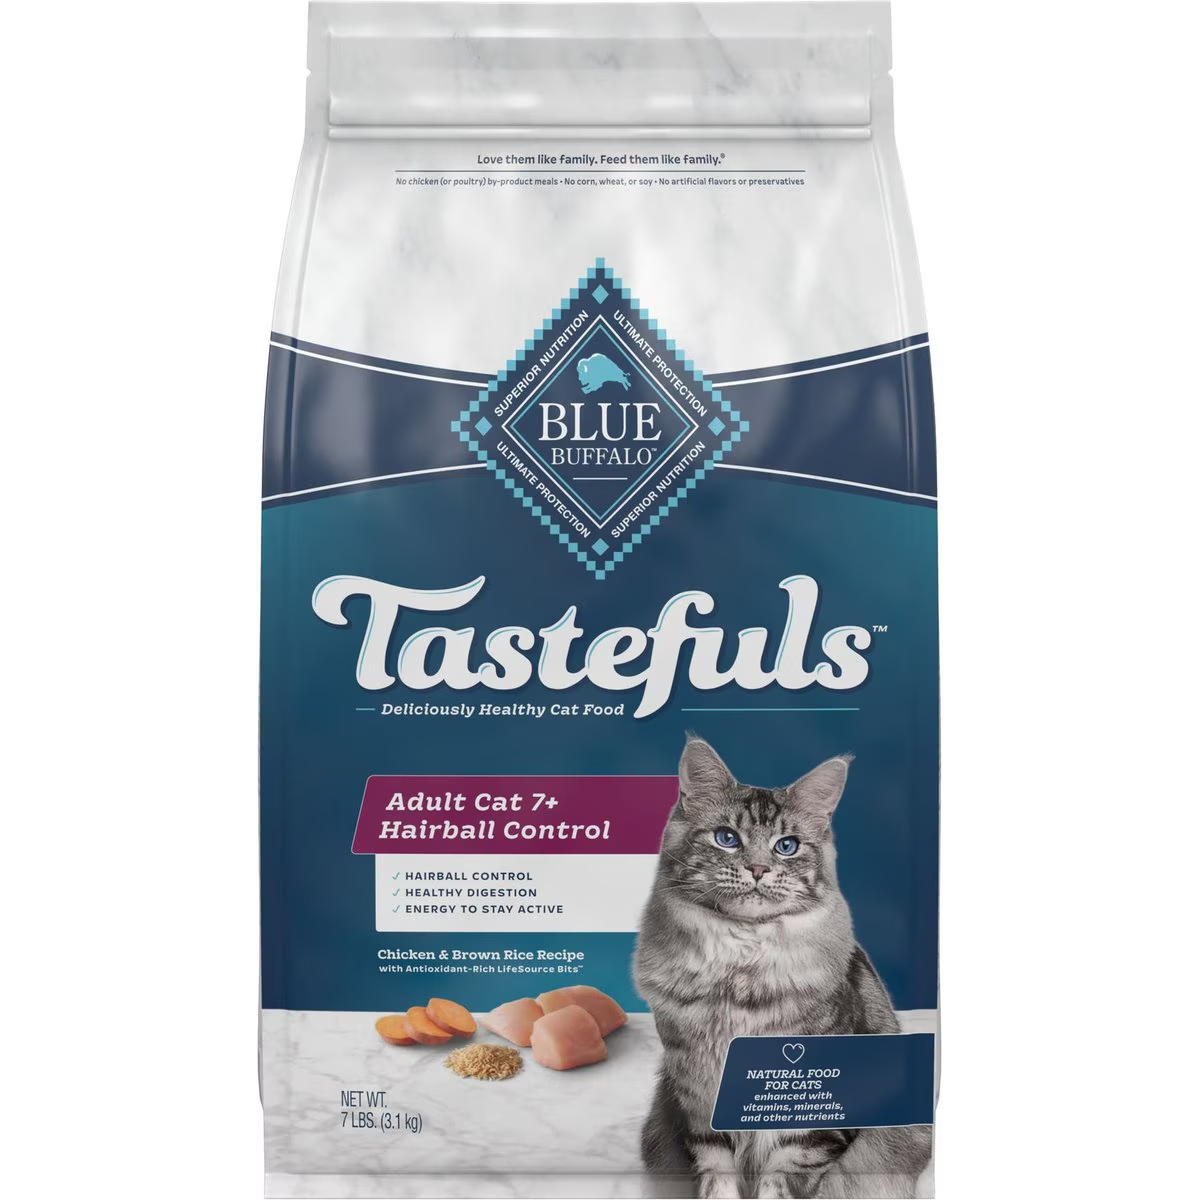 Blue Buffalo Tastefuls Hairball Control Natural Chicken & Brown Rice Recipe Adult 7+ Dry Cat Food